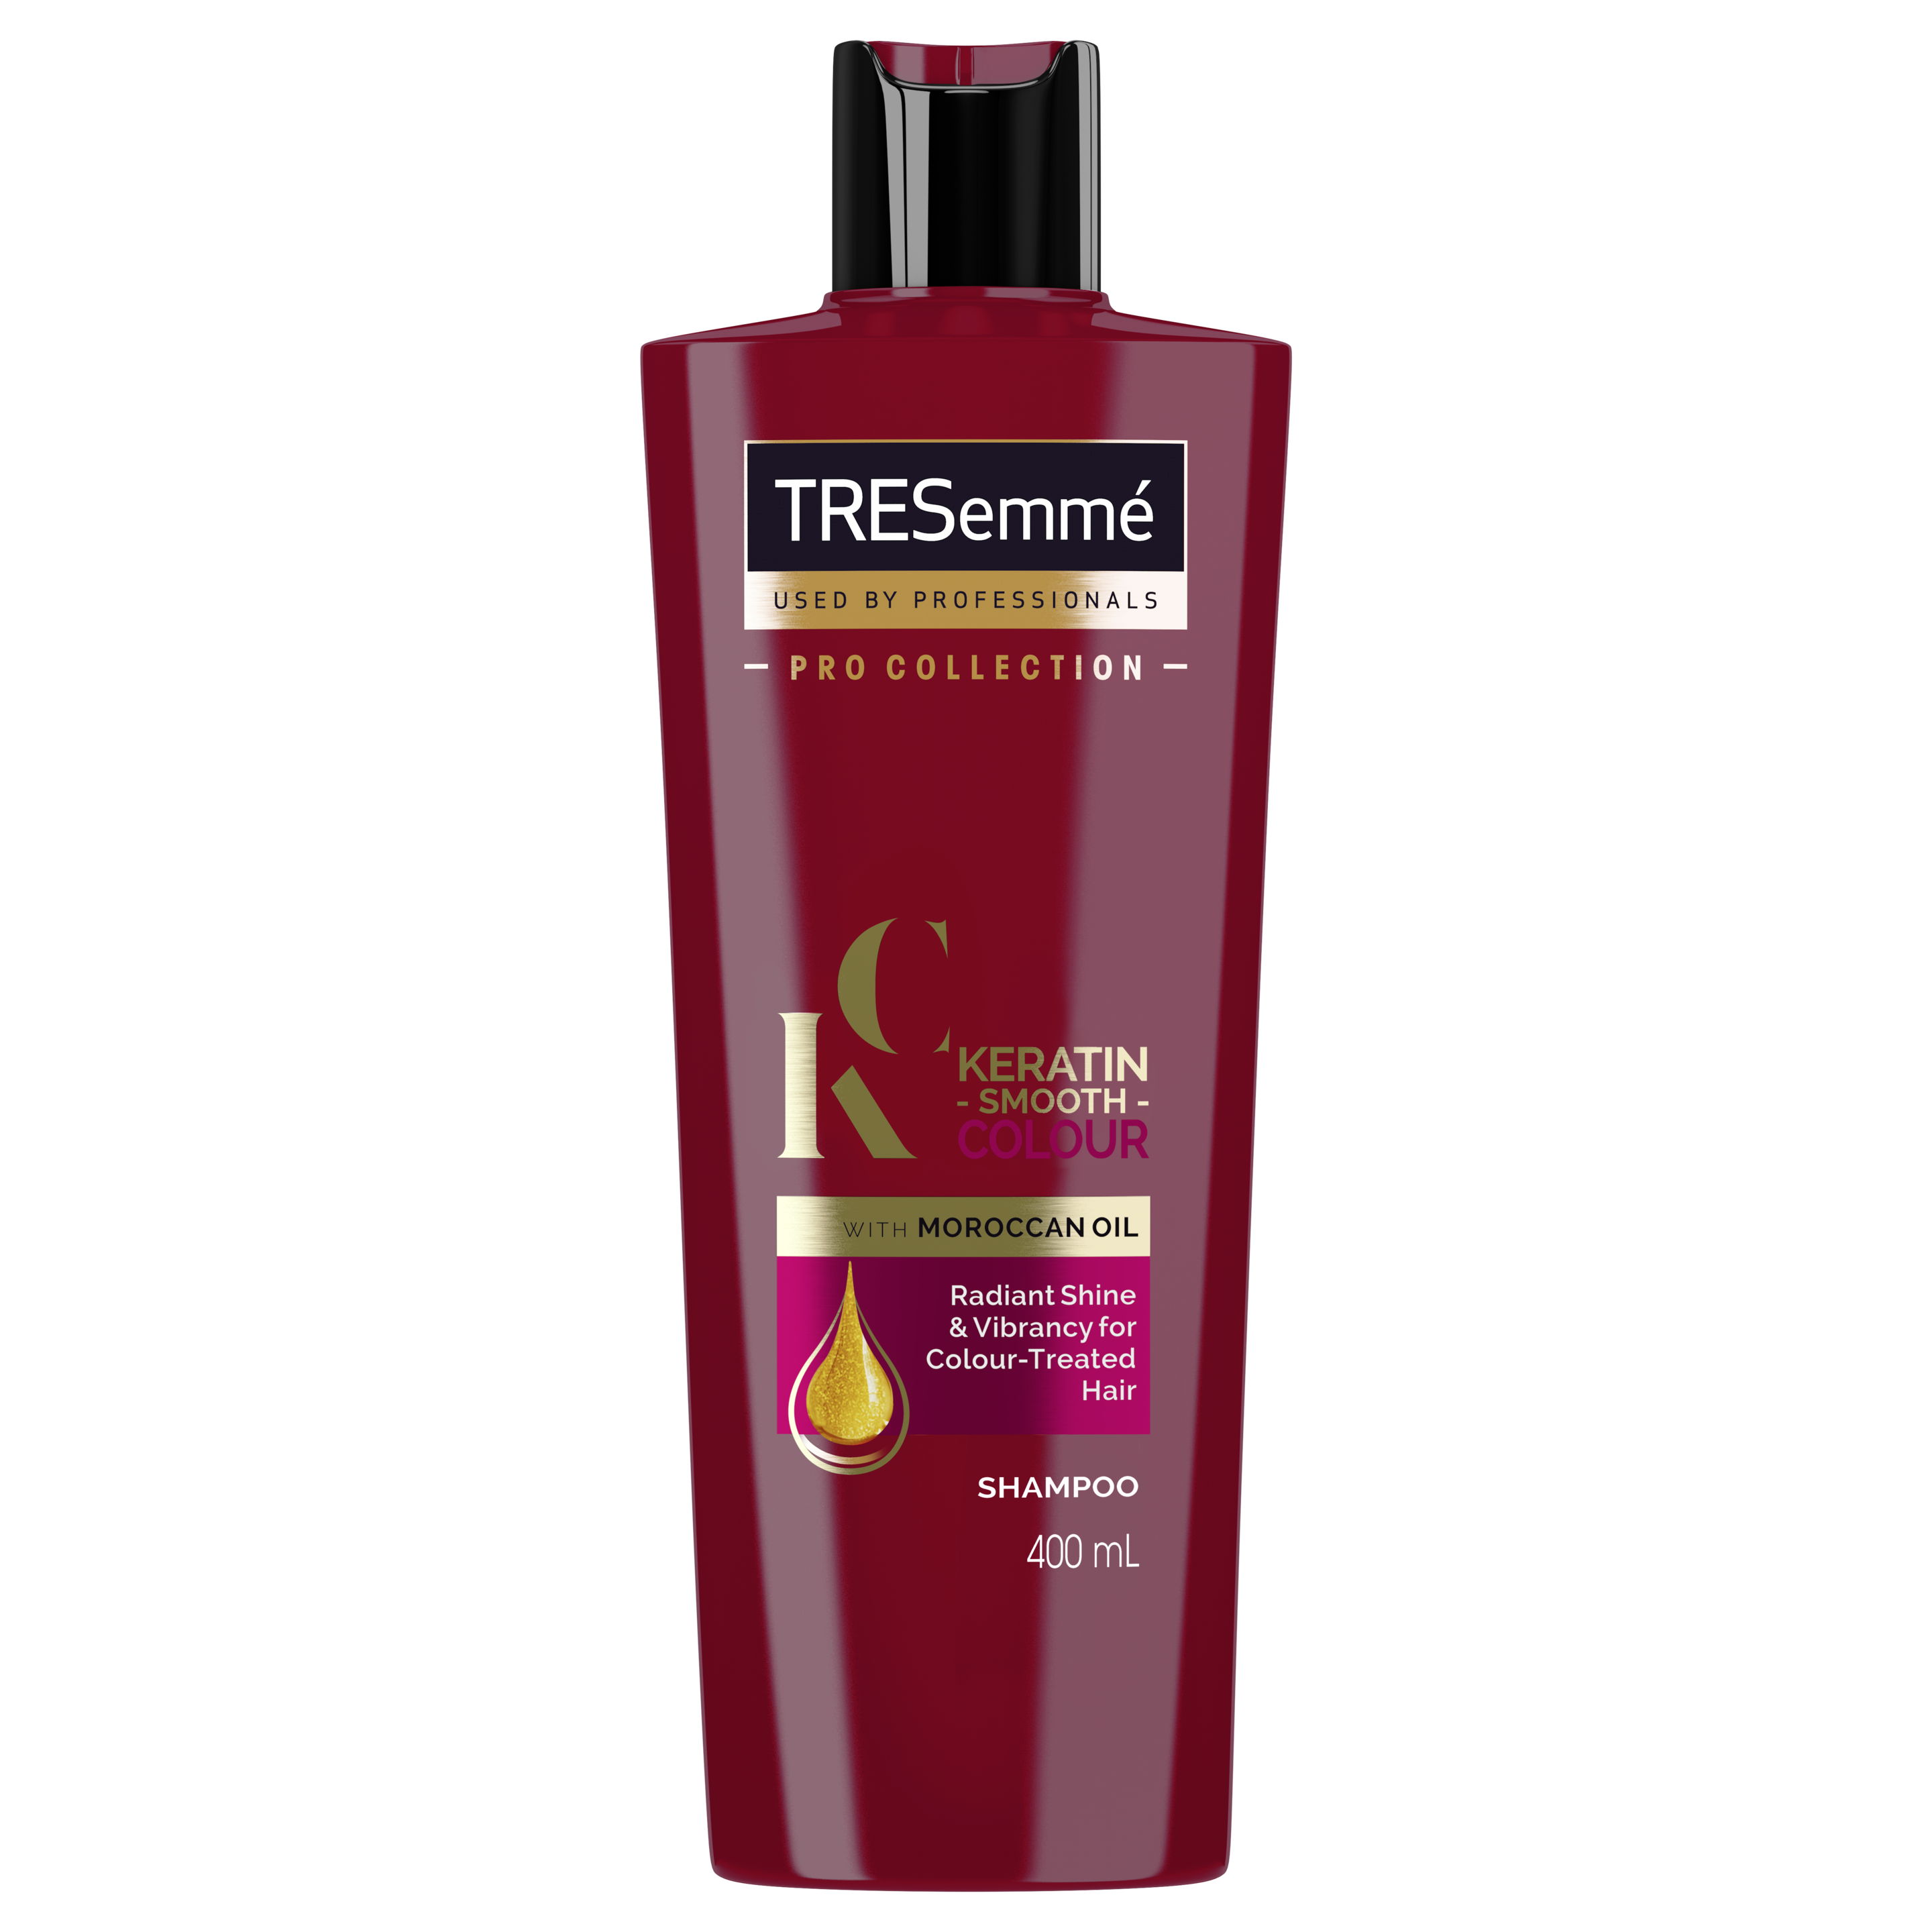 A 400ml bottle of TRESemmé Keratin Smooth Colour Shampoo front of pack image